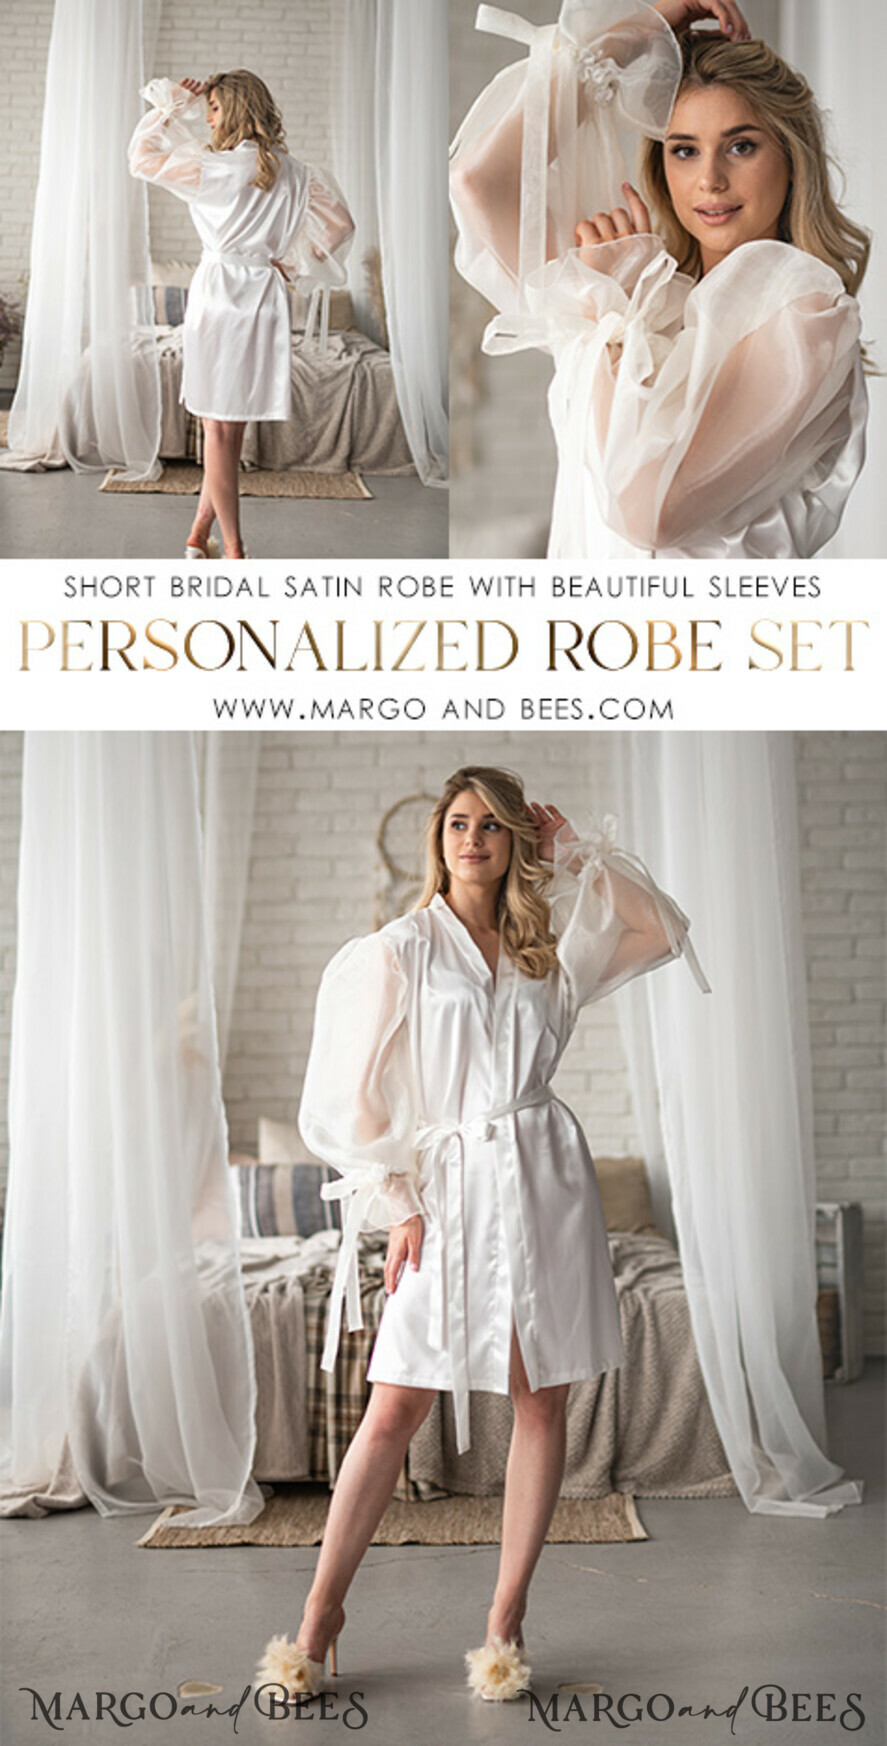 Satin his and hers personalized robes set – Bridesmaid's World